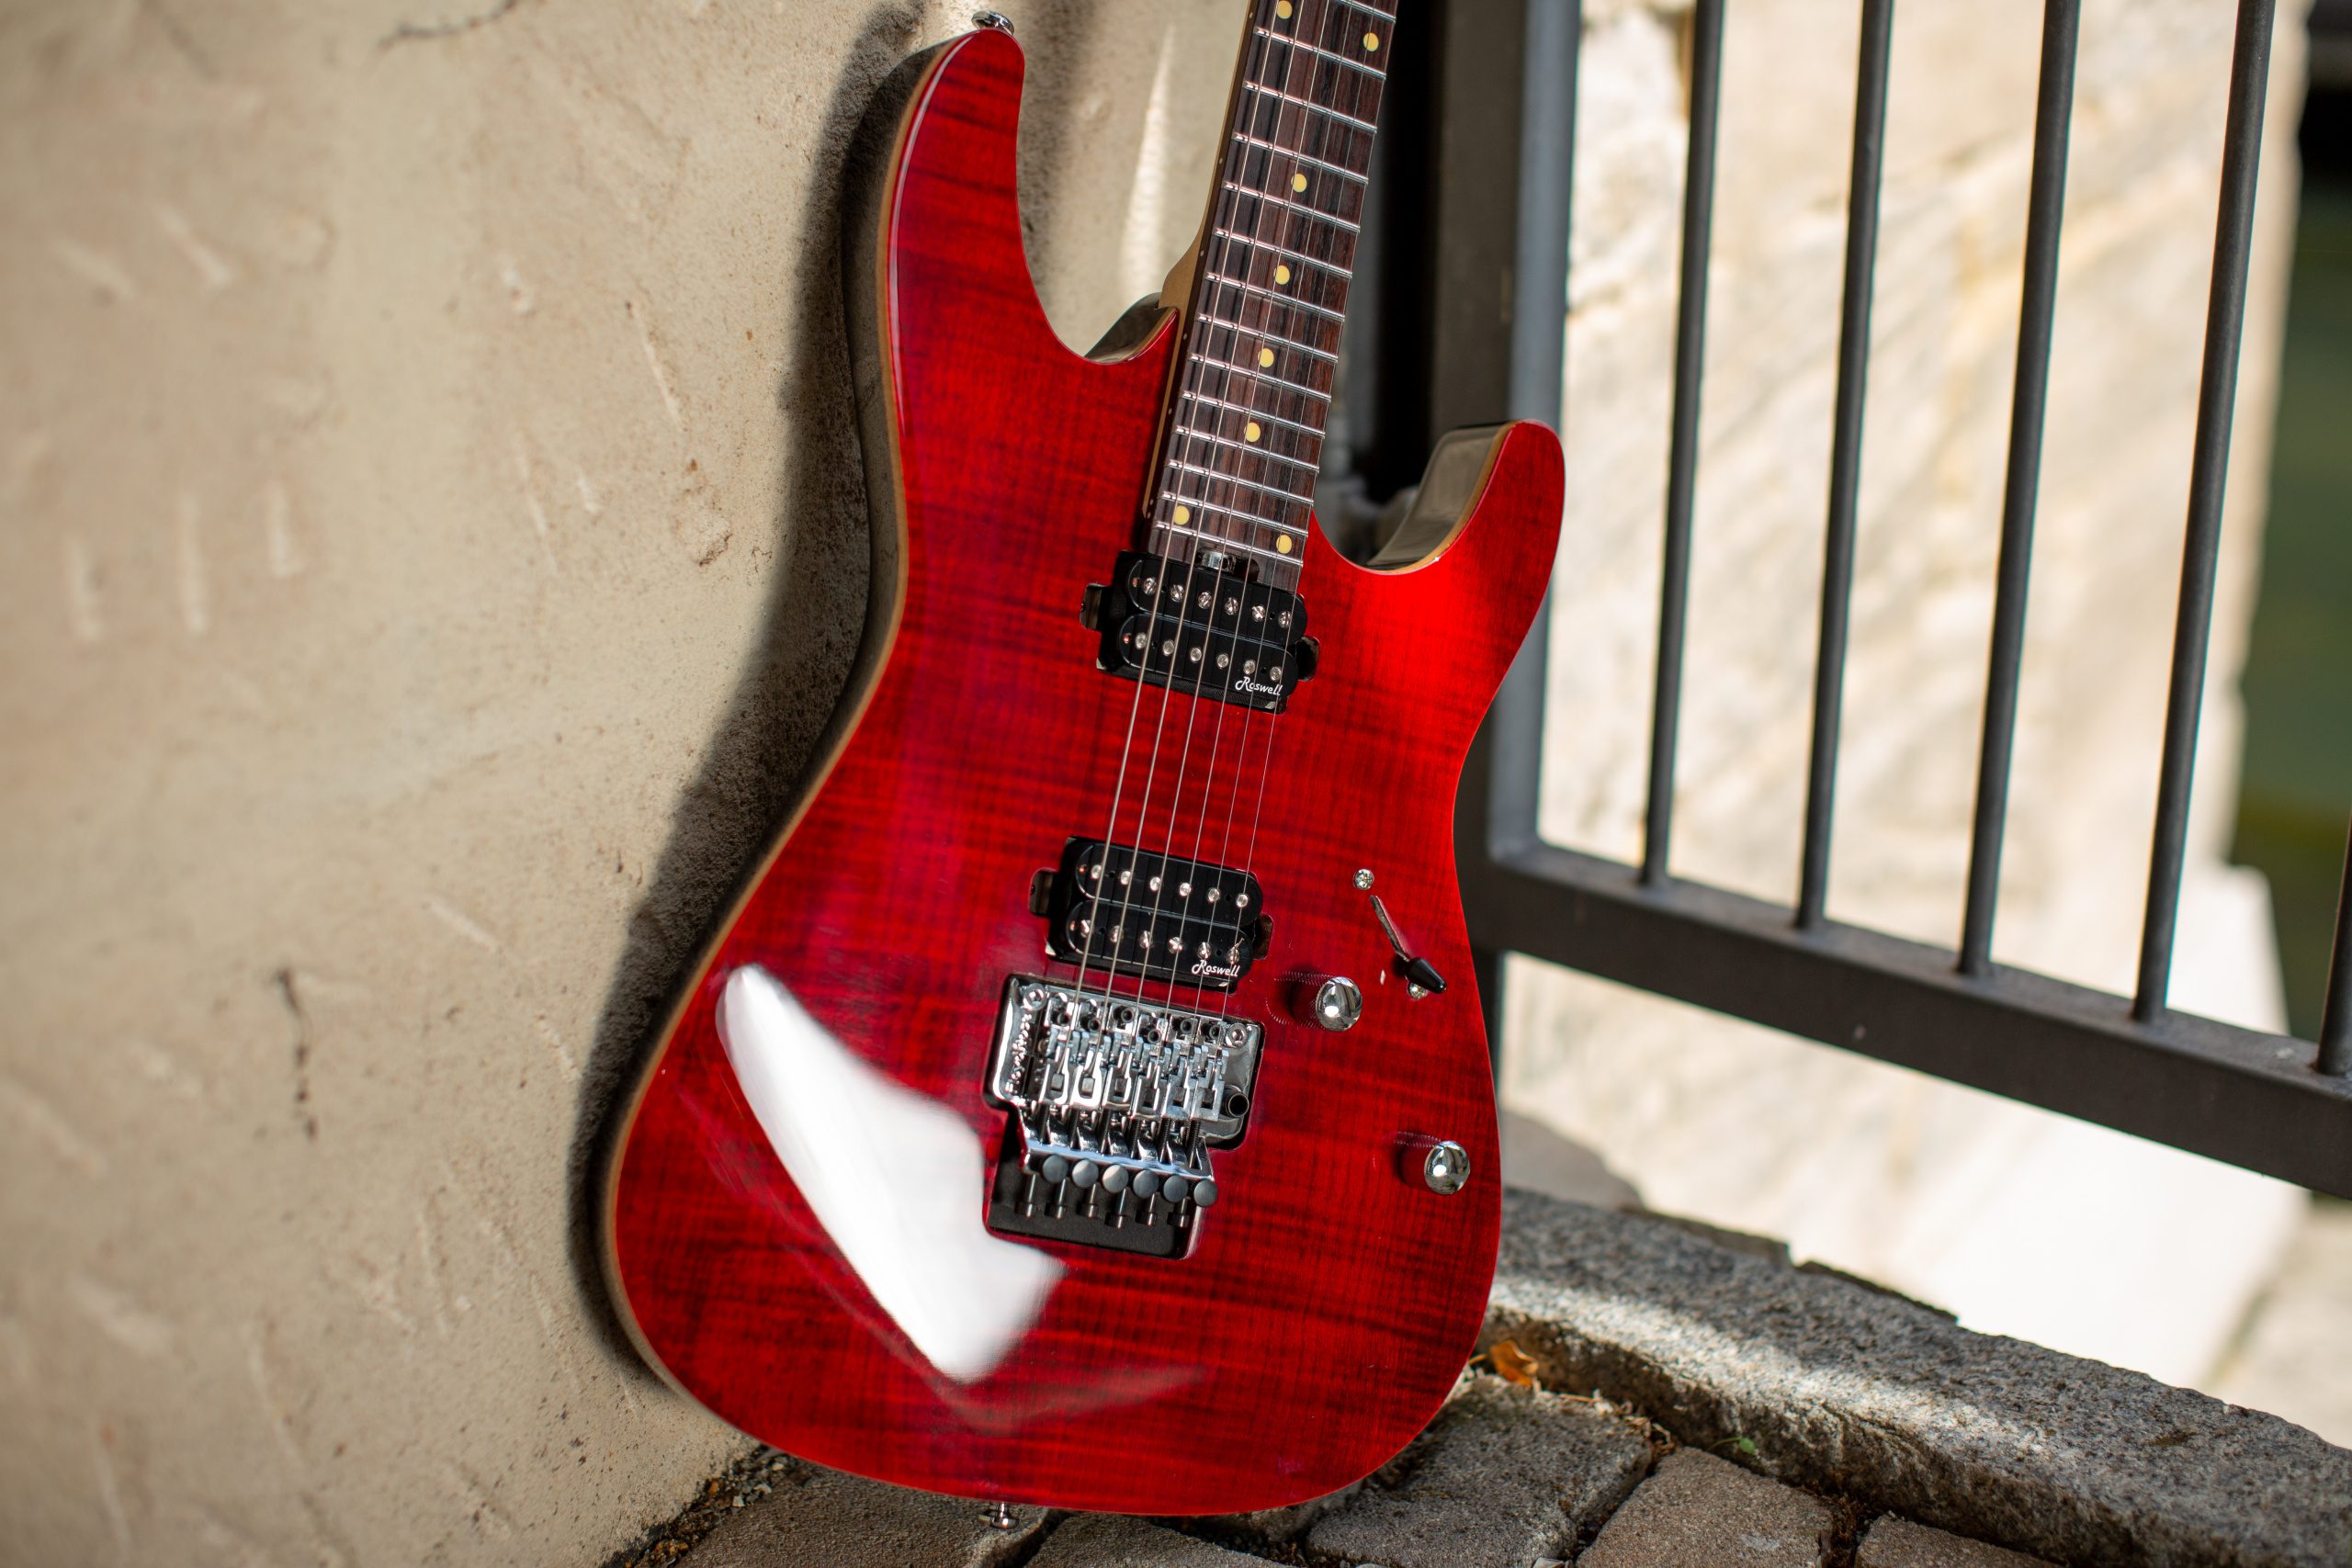 Harley Benton Fusion-III HH in Trans Flamed Cherry